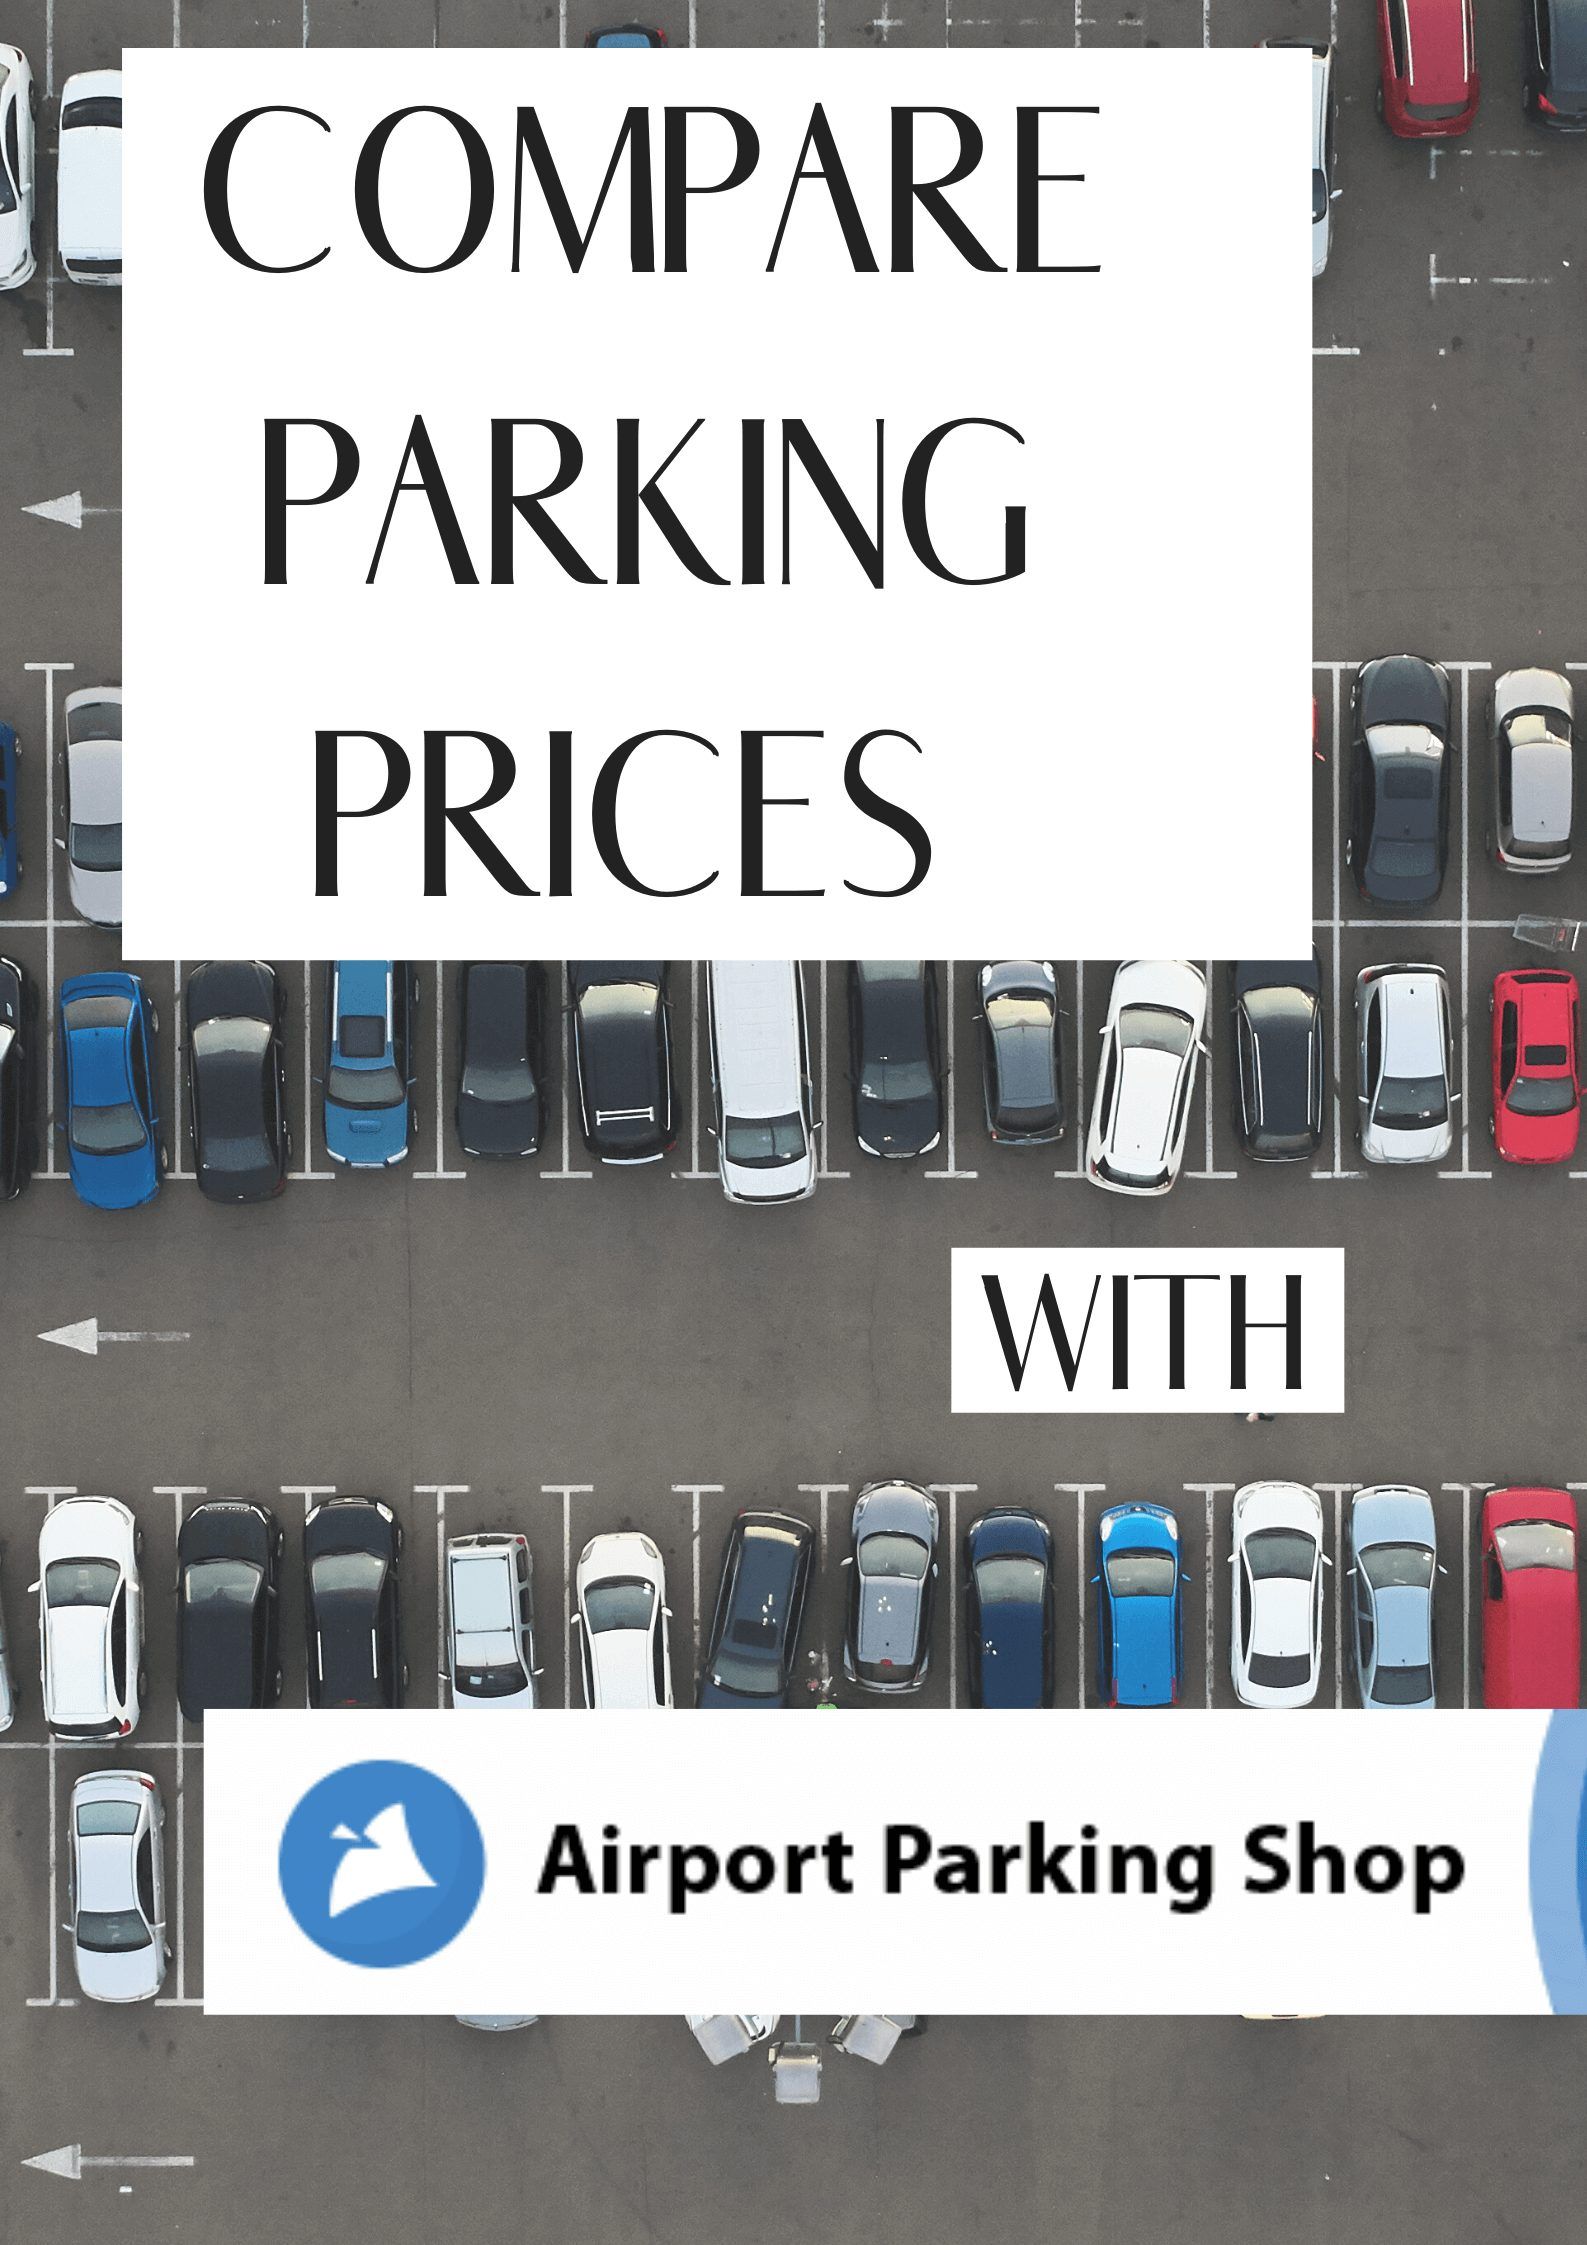 Parking at newcastle airport